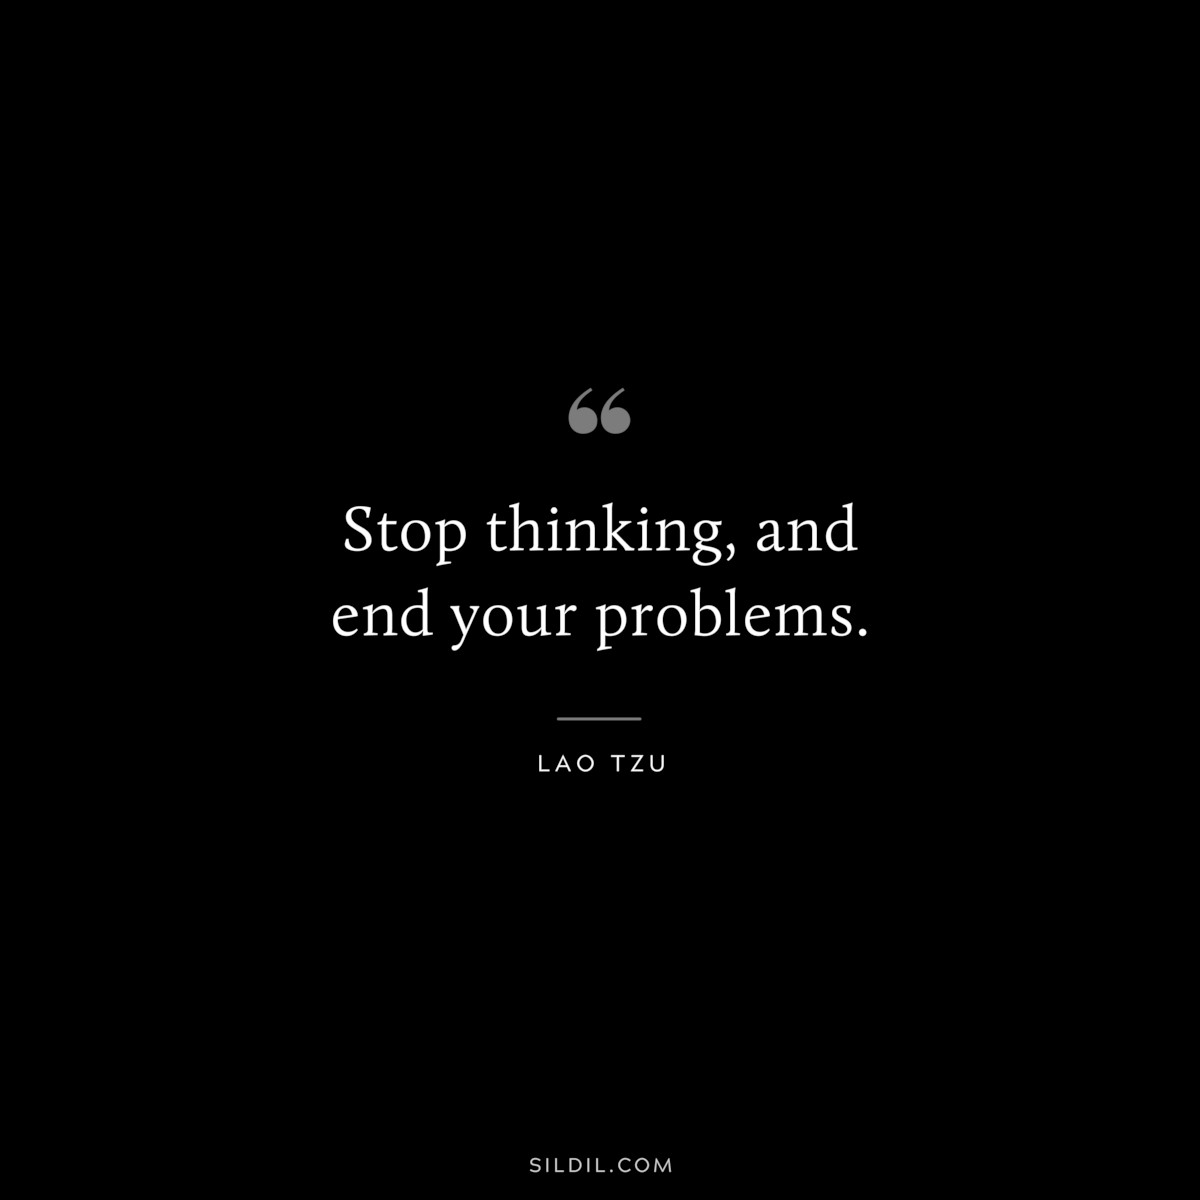 Stop thinking, and end your problems. ― Lao Tzu